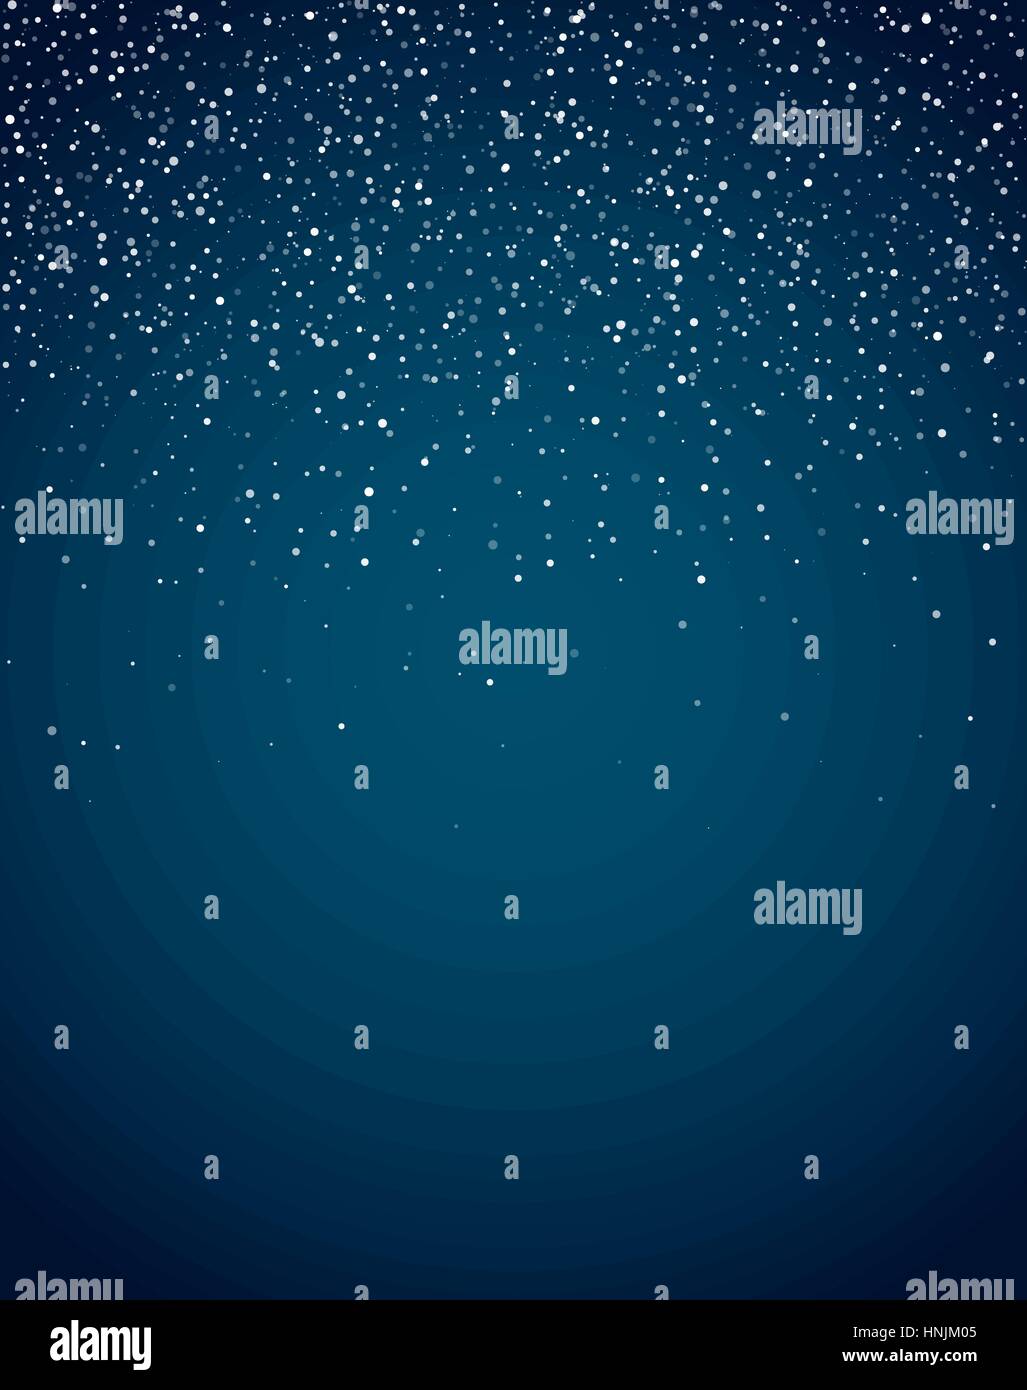 Snow white Stock Vector Images - Alamy